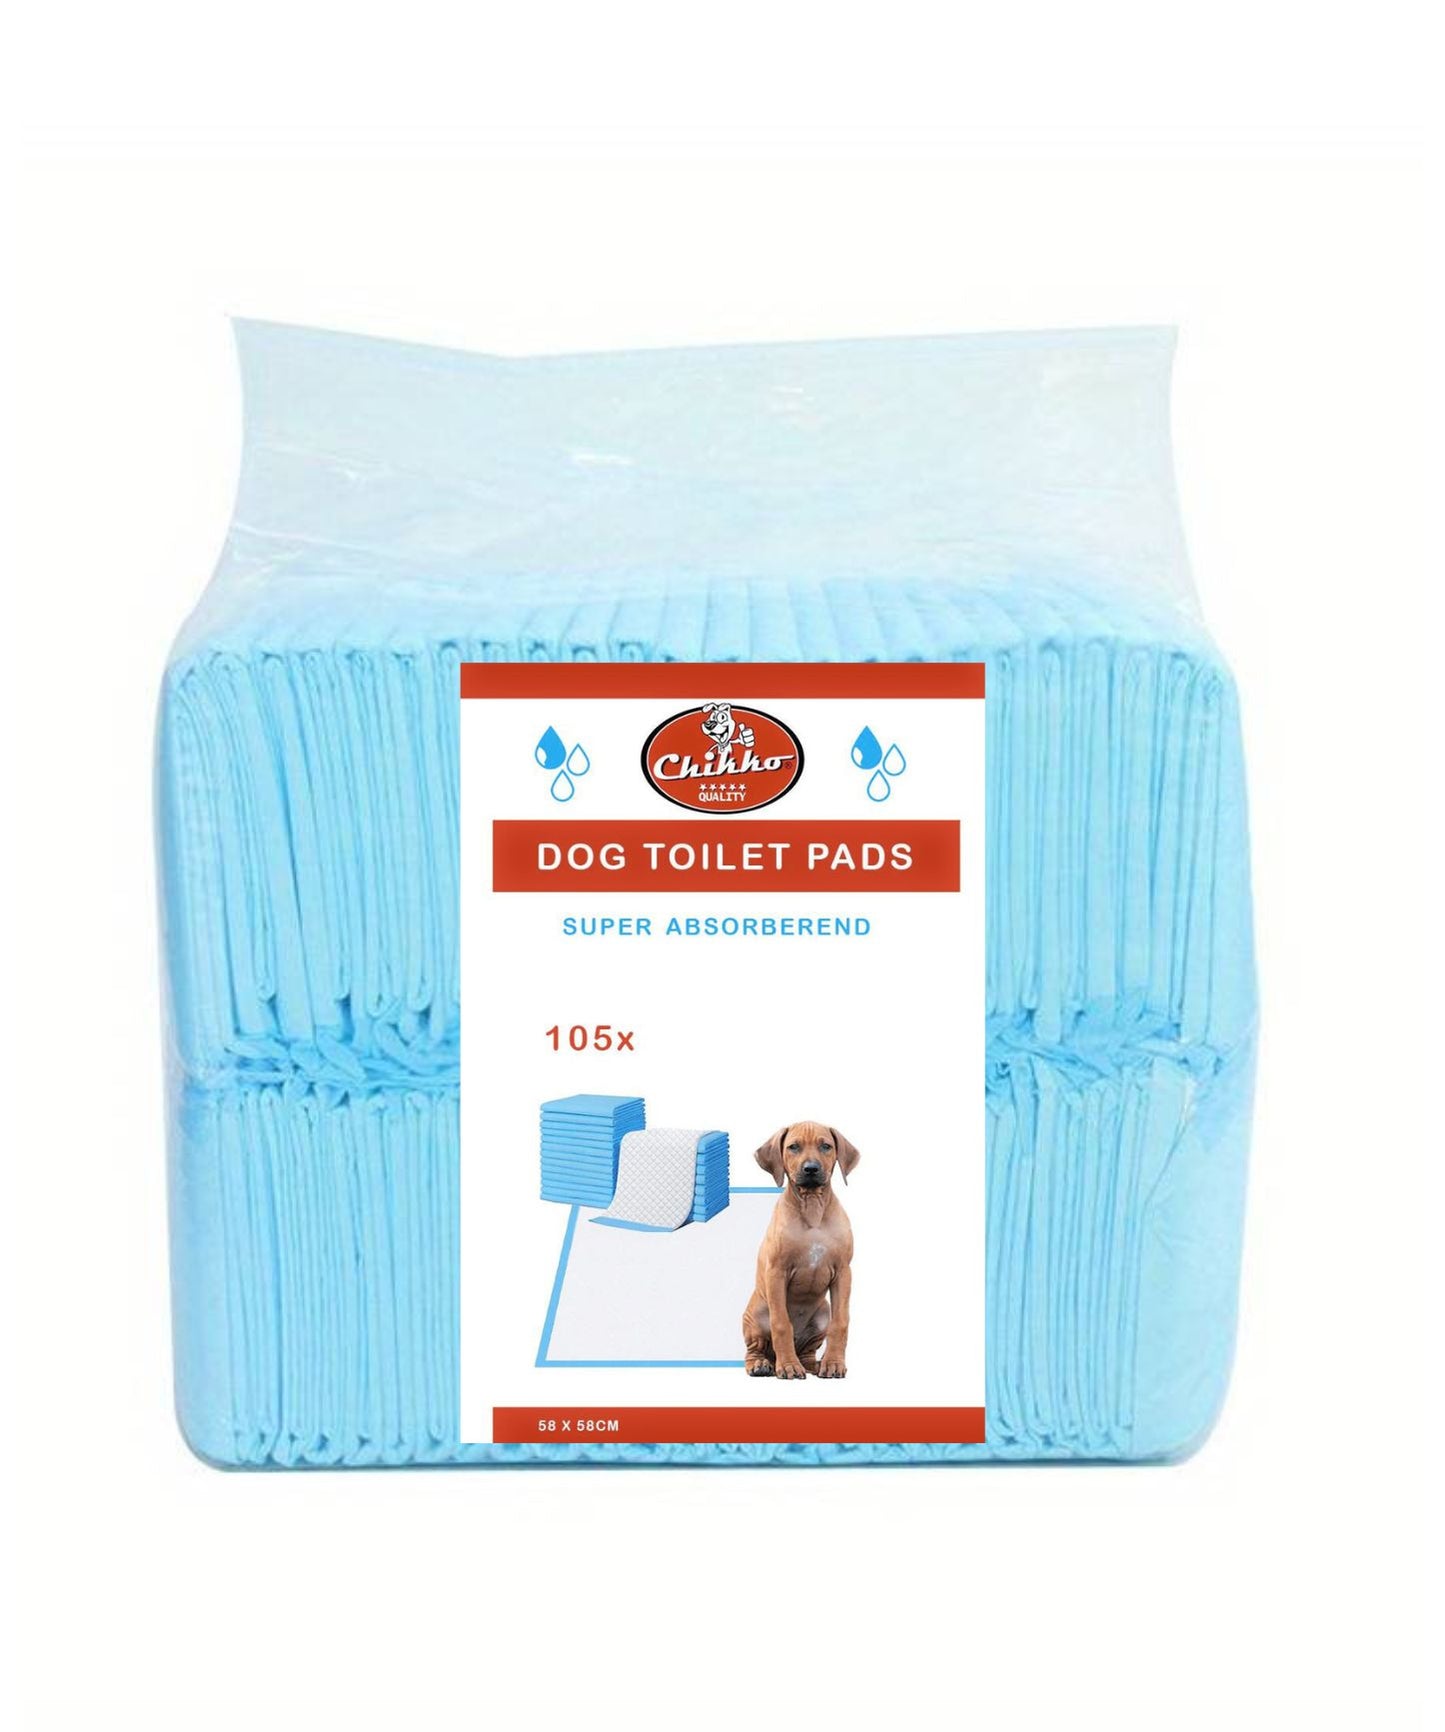 Dog Toilet Pads